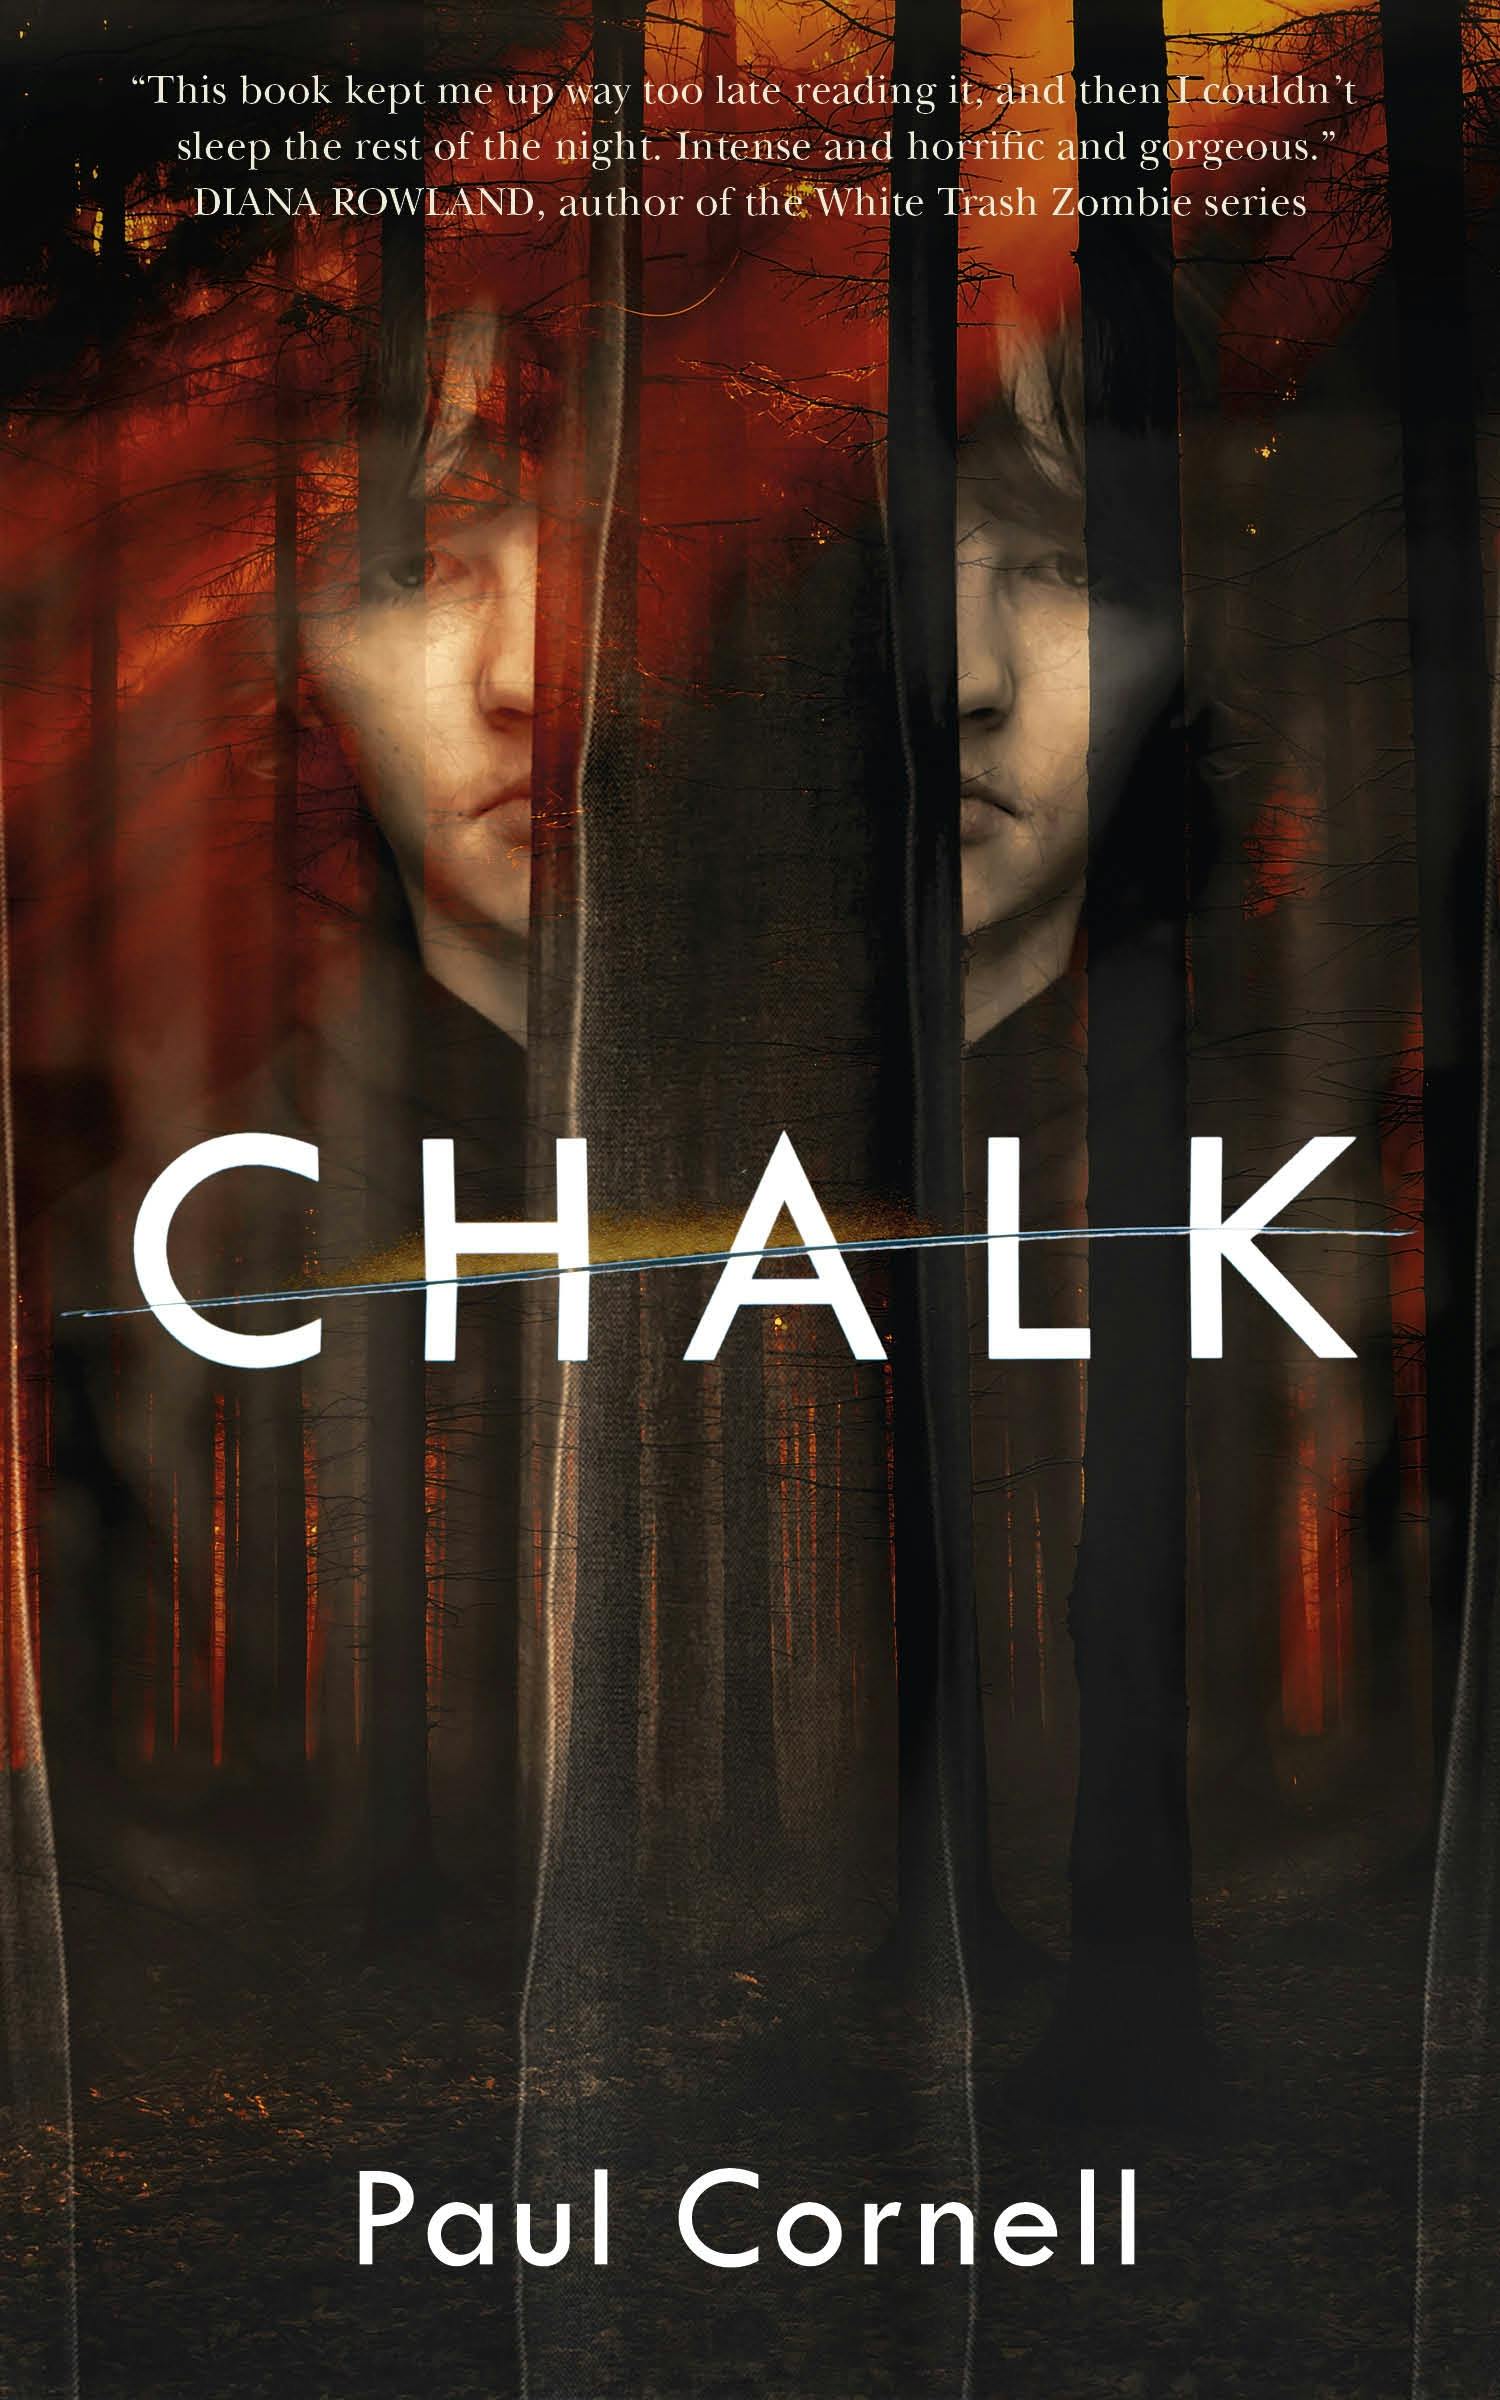 Cover for the book titled as: Chalk